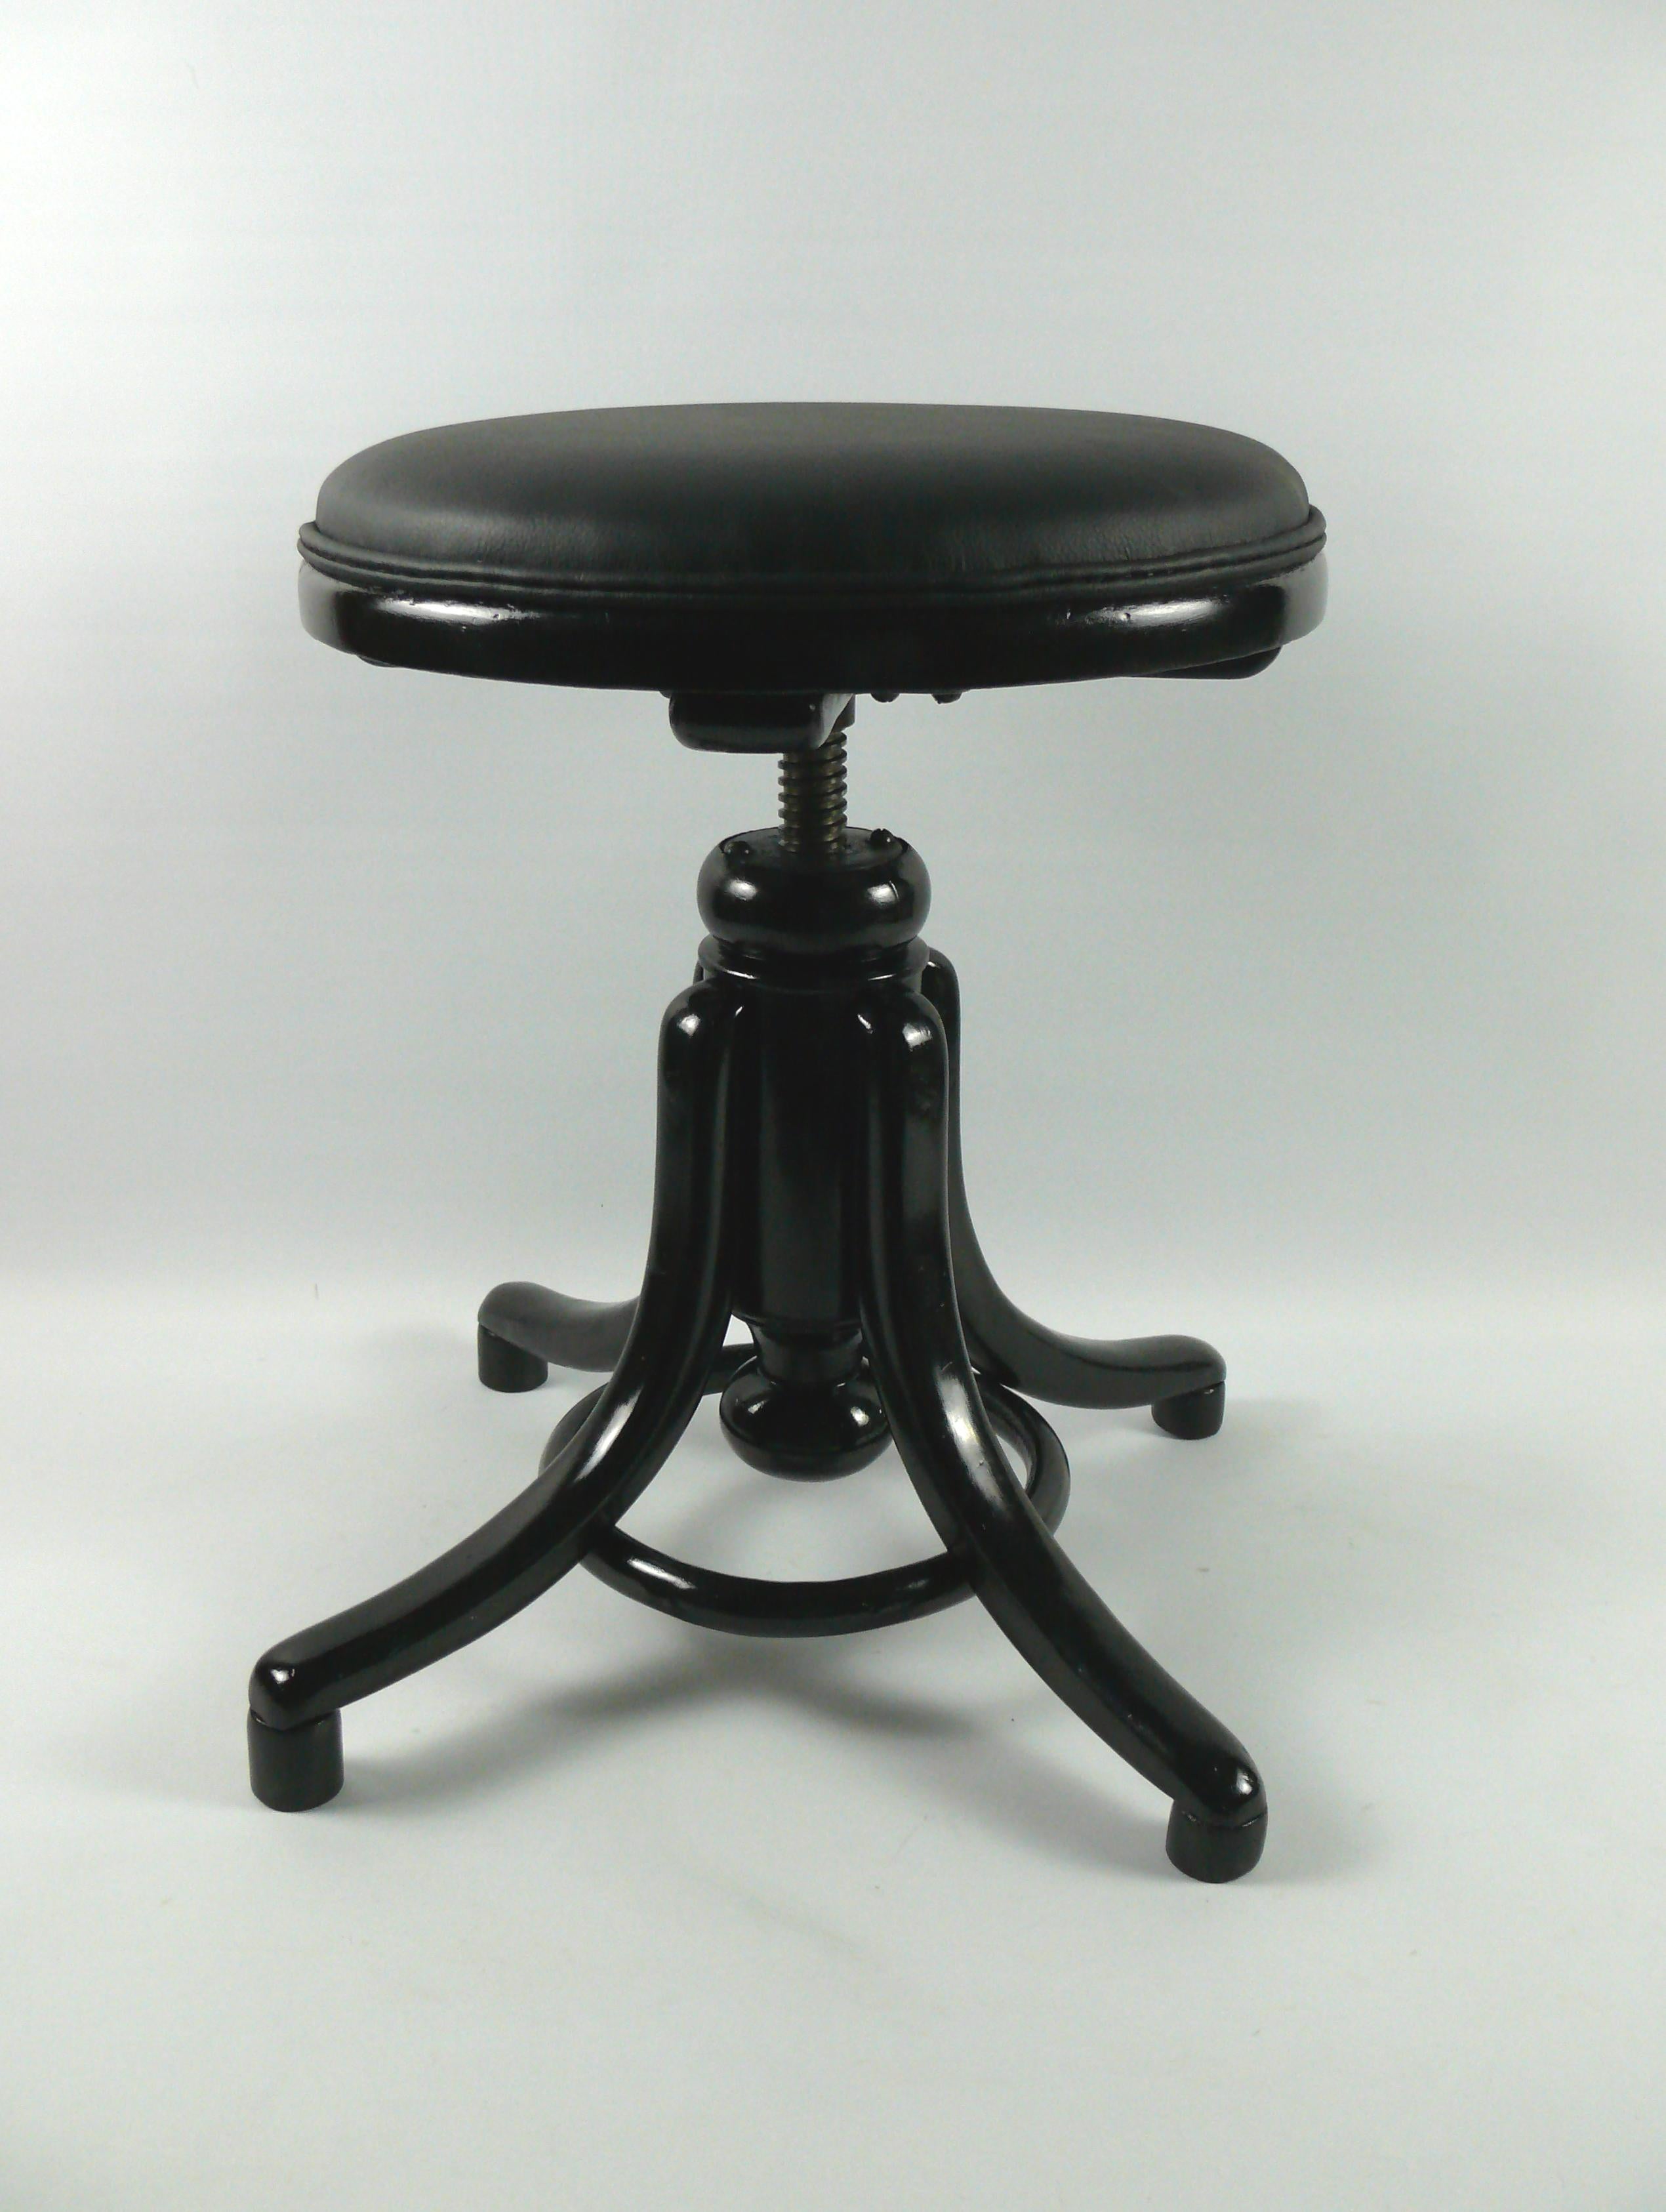 Restored piano stool / swivel stool by Gebrüder Thonet. The piano stool is made of beech wood and has four steam-bent feet with a bentwood ring for stability. The stool can be adjusted in height from 43 cm to approx. 63 cm. The spindle runs fine.